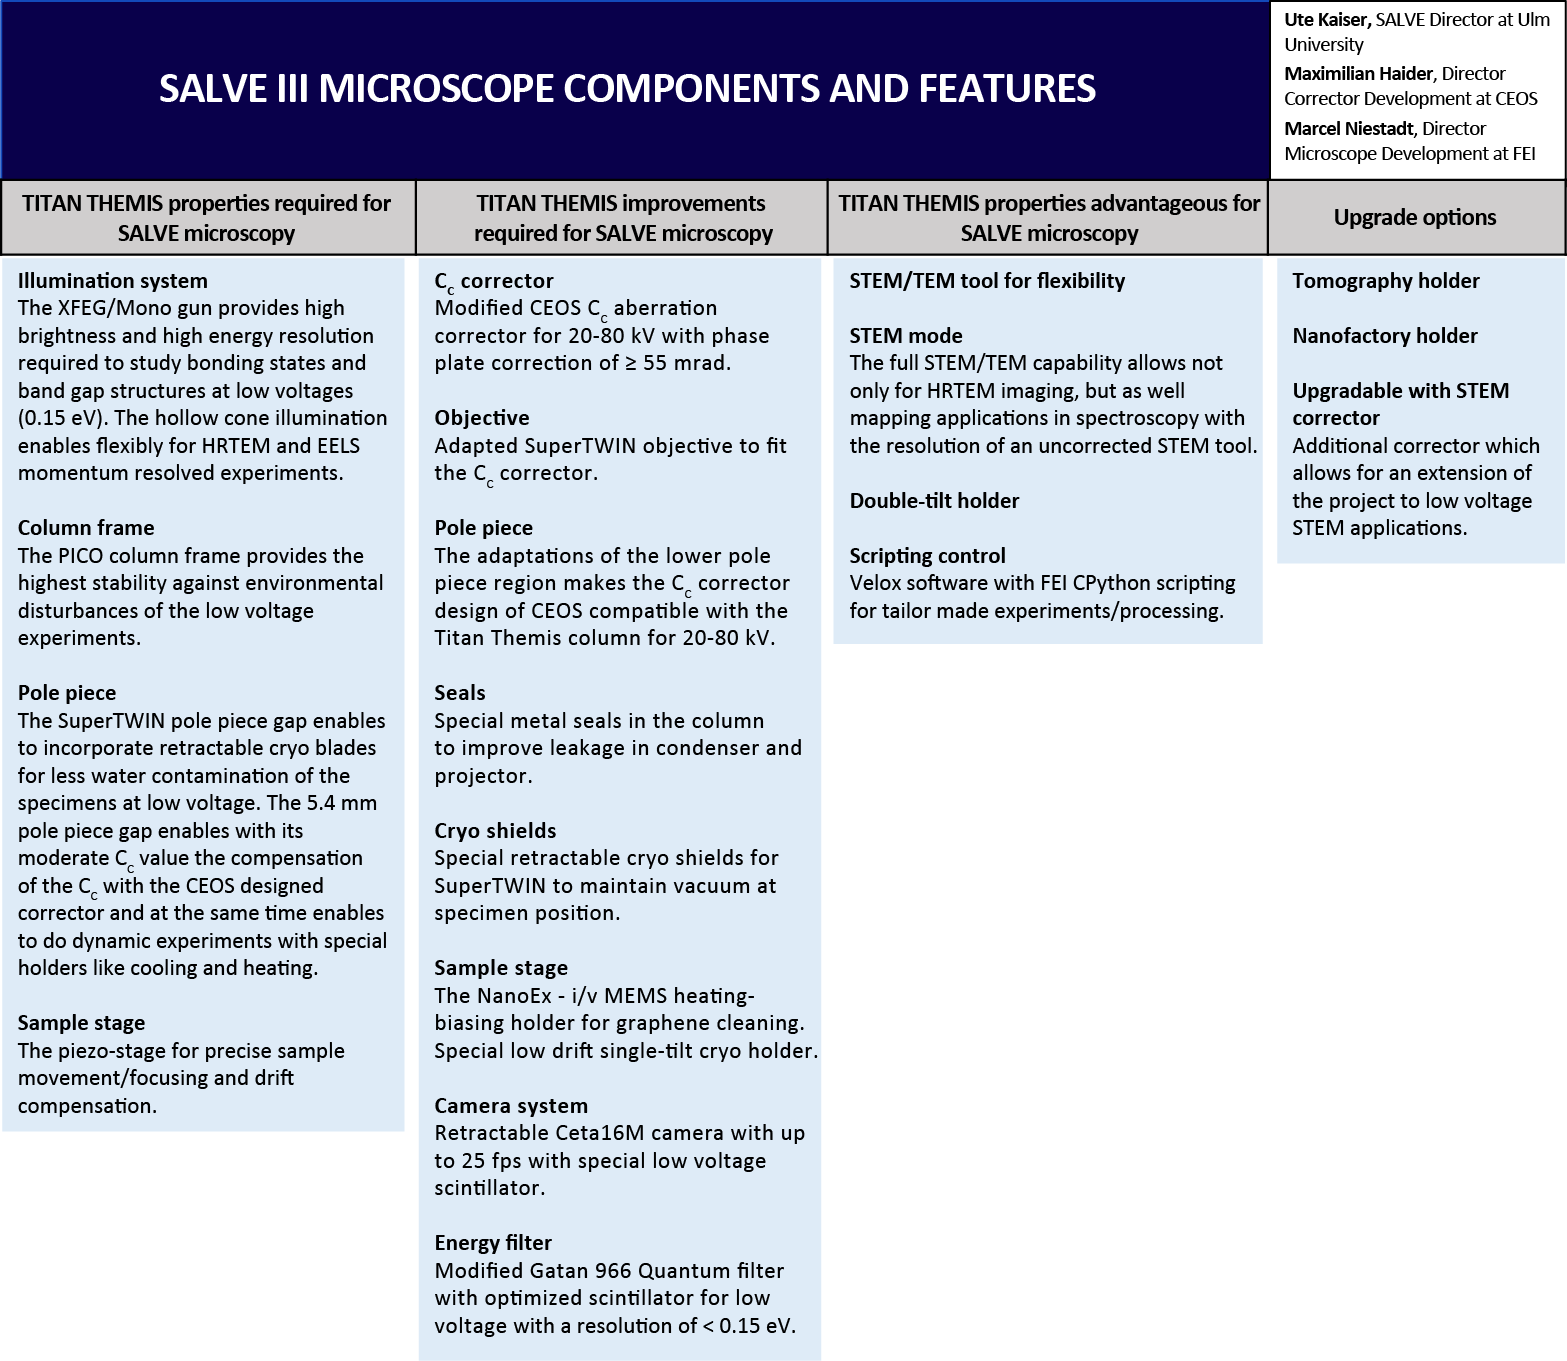 specs of the SALVE III microscope listed in a table